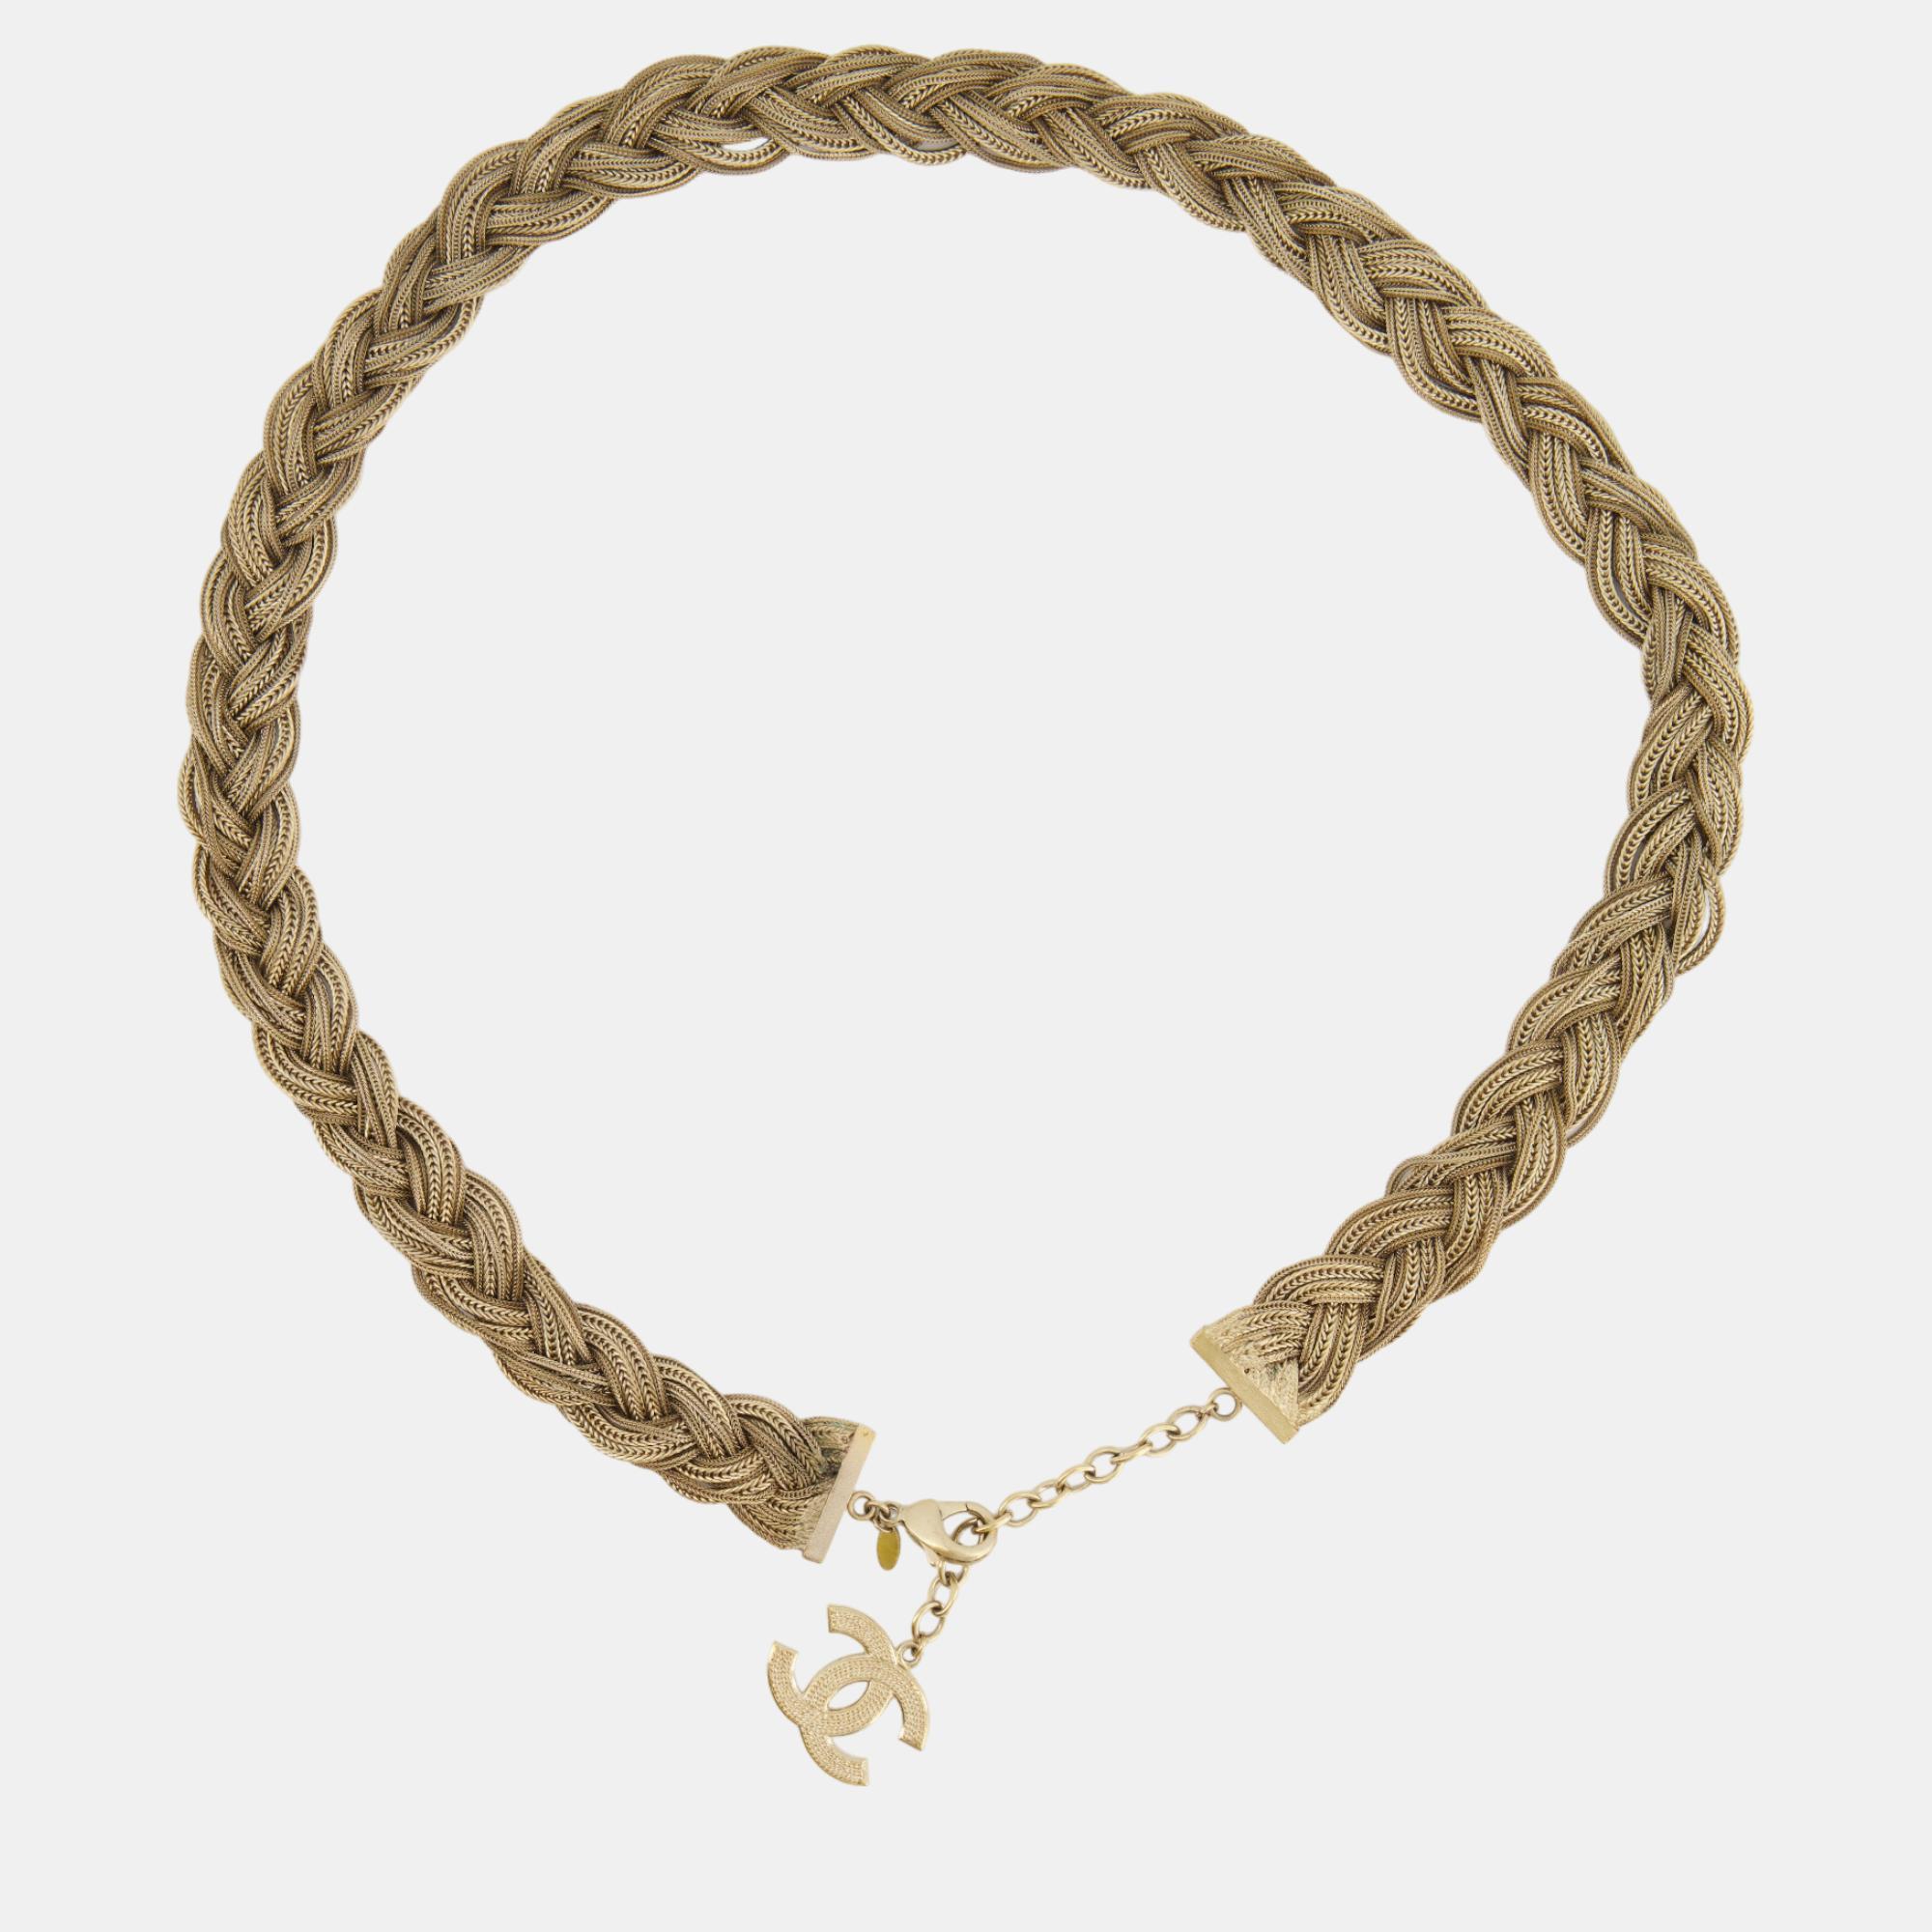 Chanel Gold Braided Belt With Gold CC Logo Detail Size 75cm